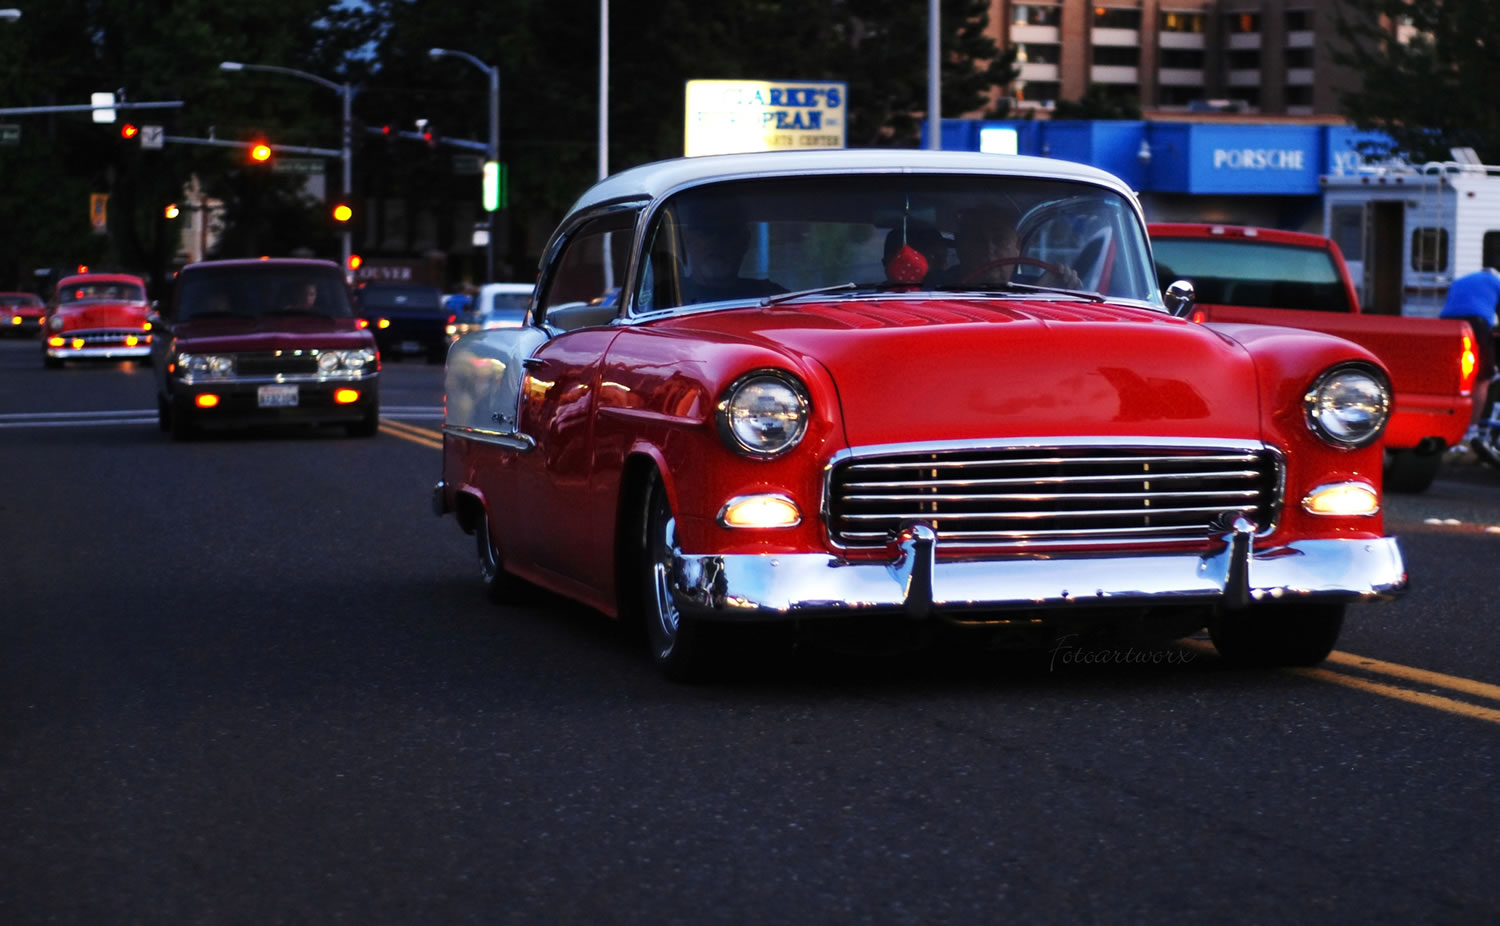 Hundreds of classic cars parade along Main Street during Crusin' the Gut, Vancouver's annual homage to the once-popular practice of cruising and meeting with friends on Friday and Saturday nights.